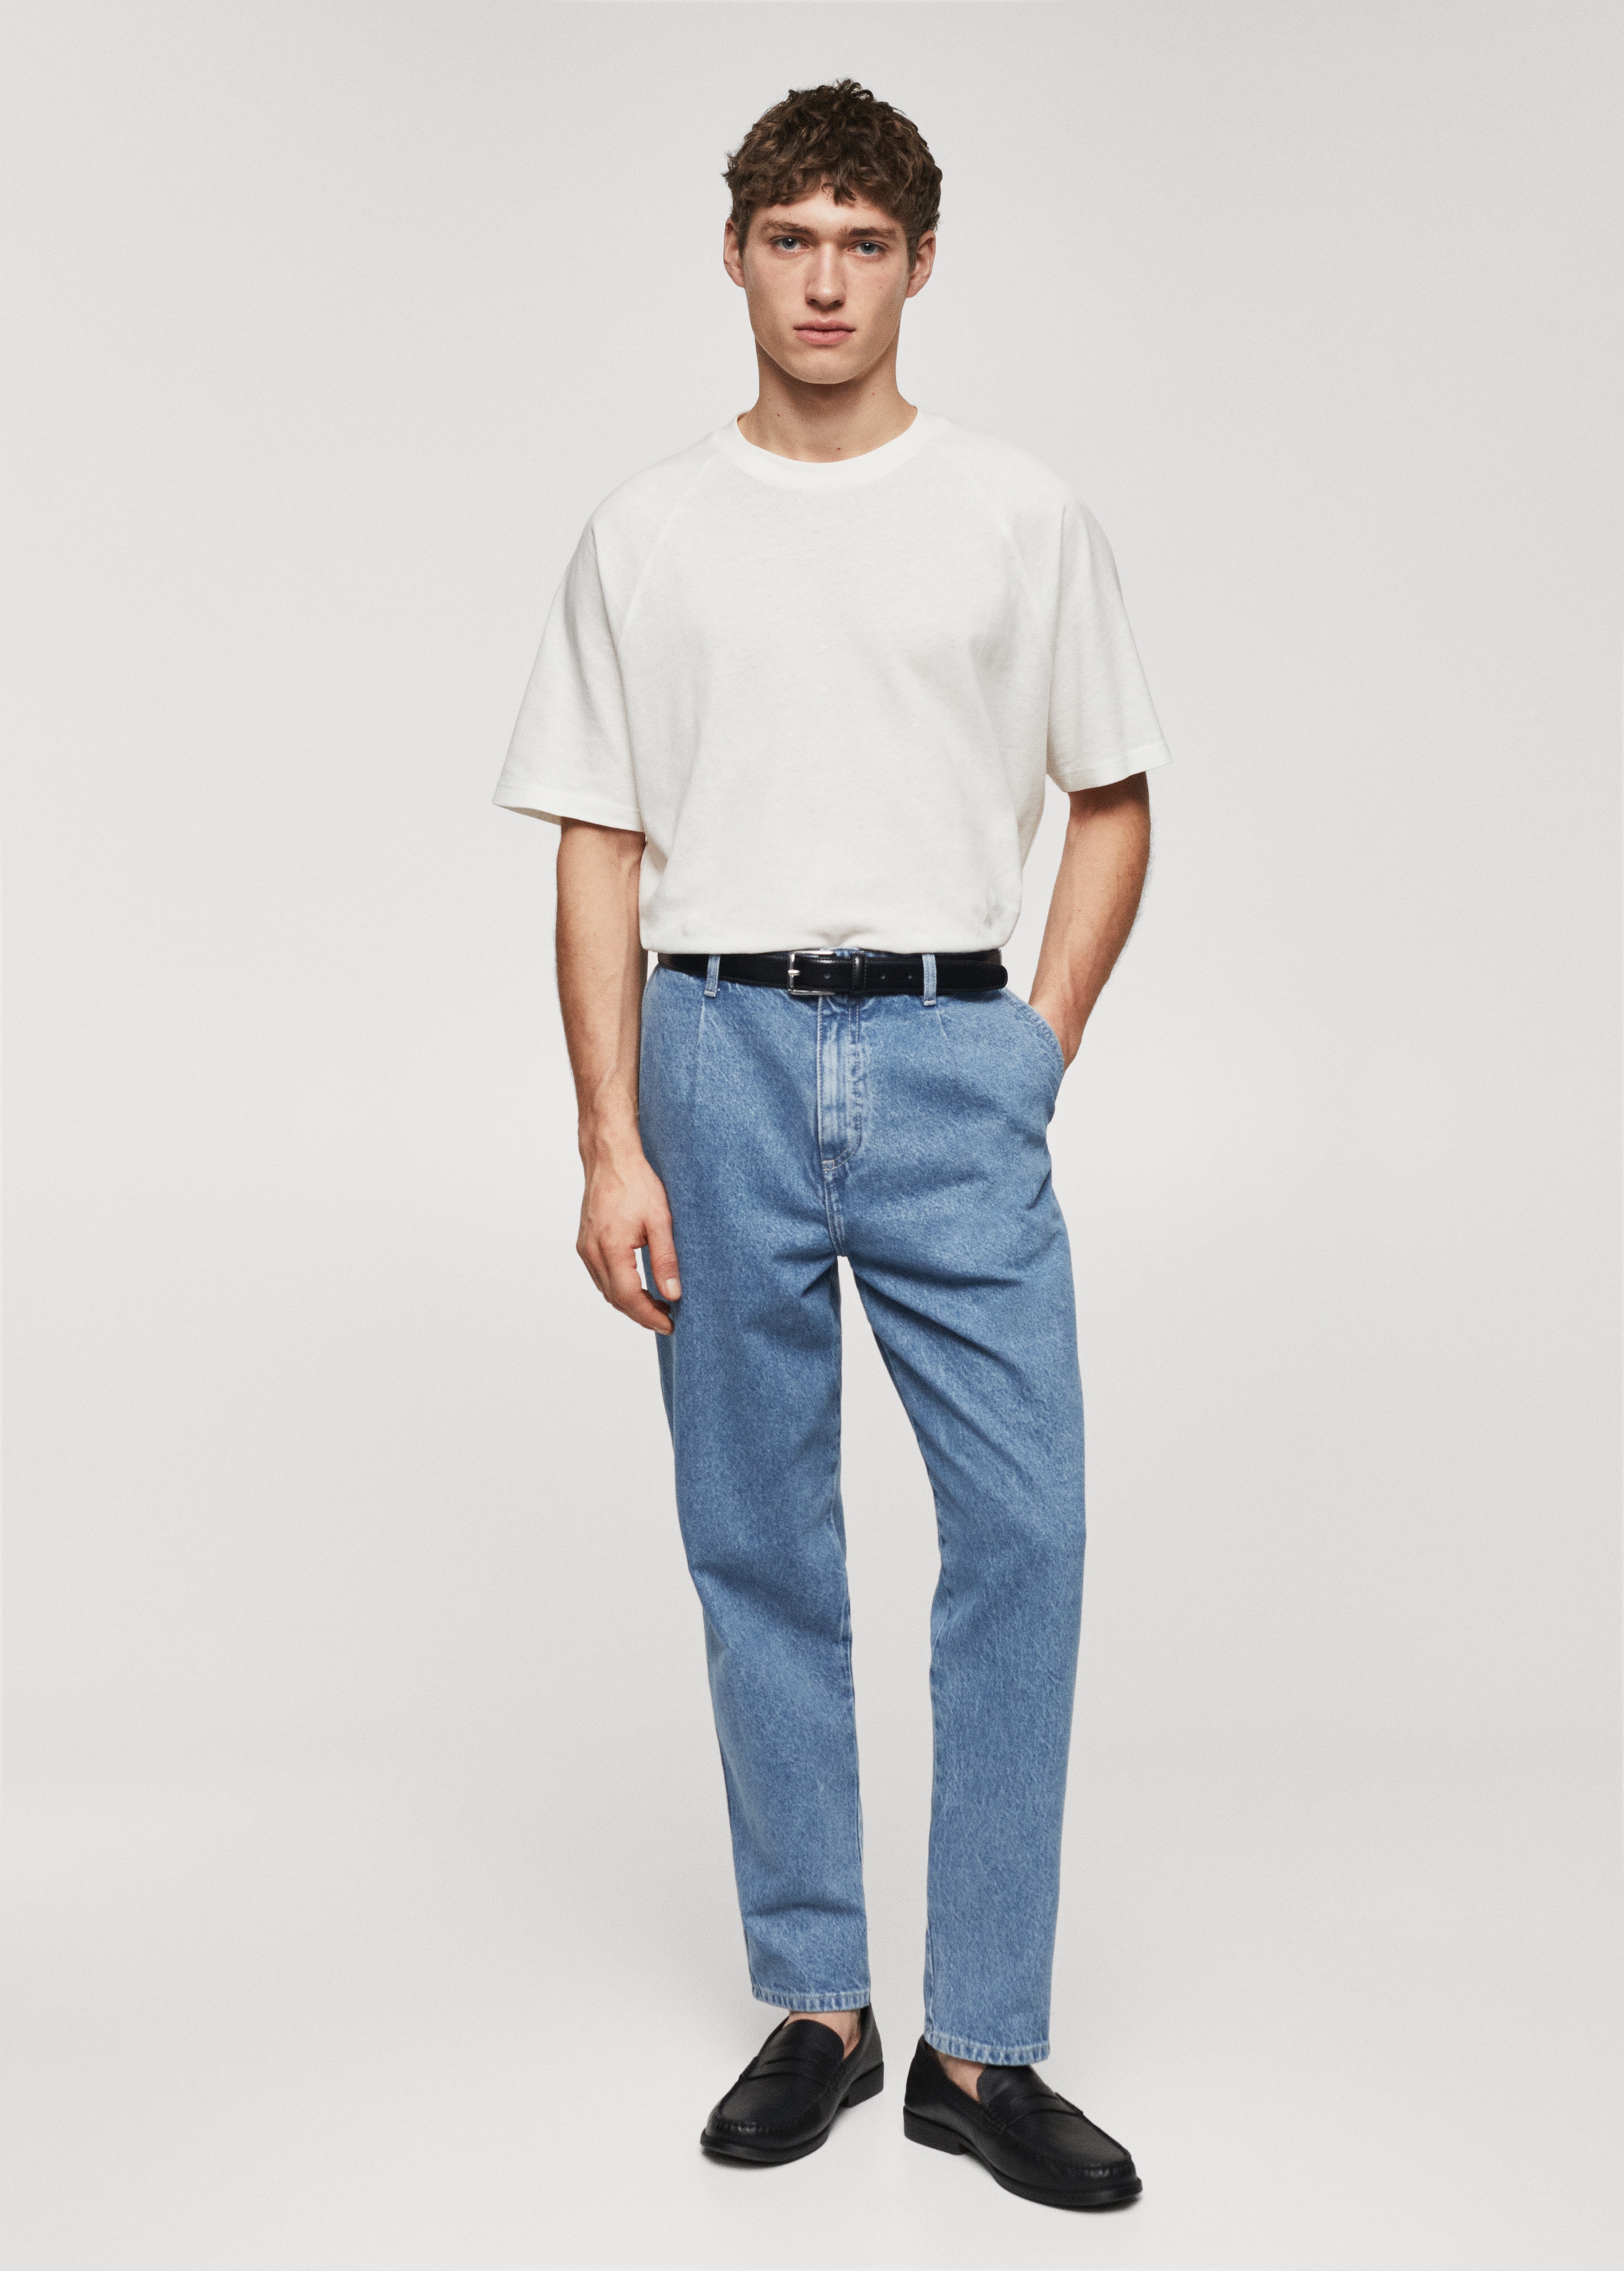 Jeans slouchy pinzas  - Plano general